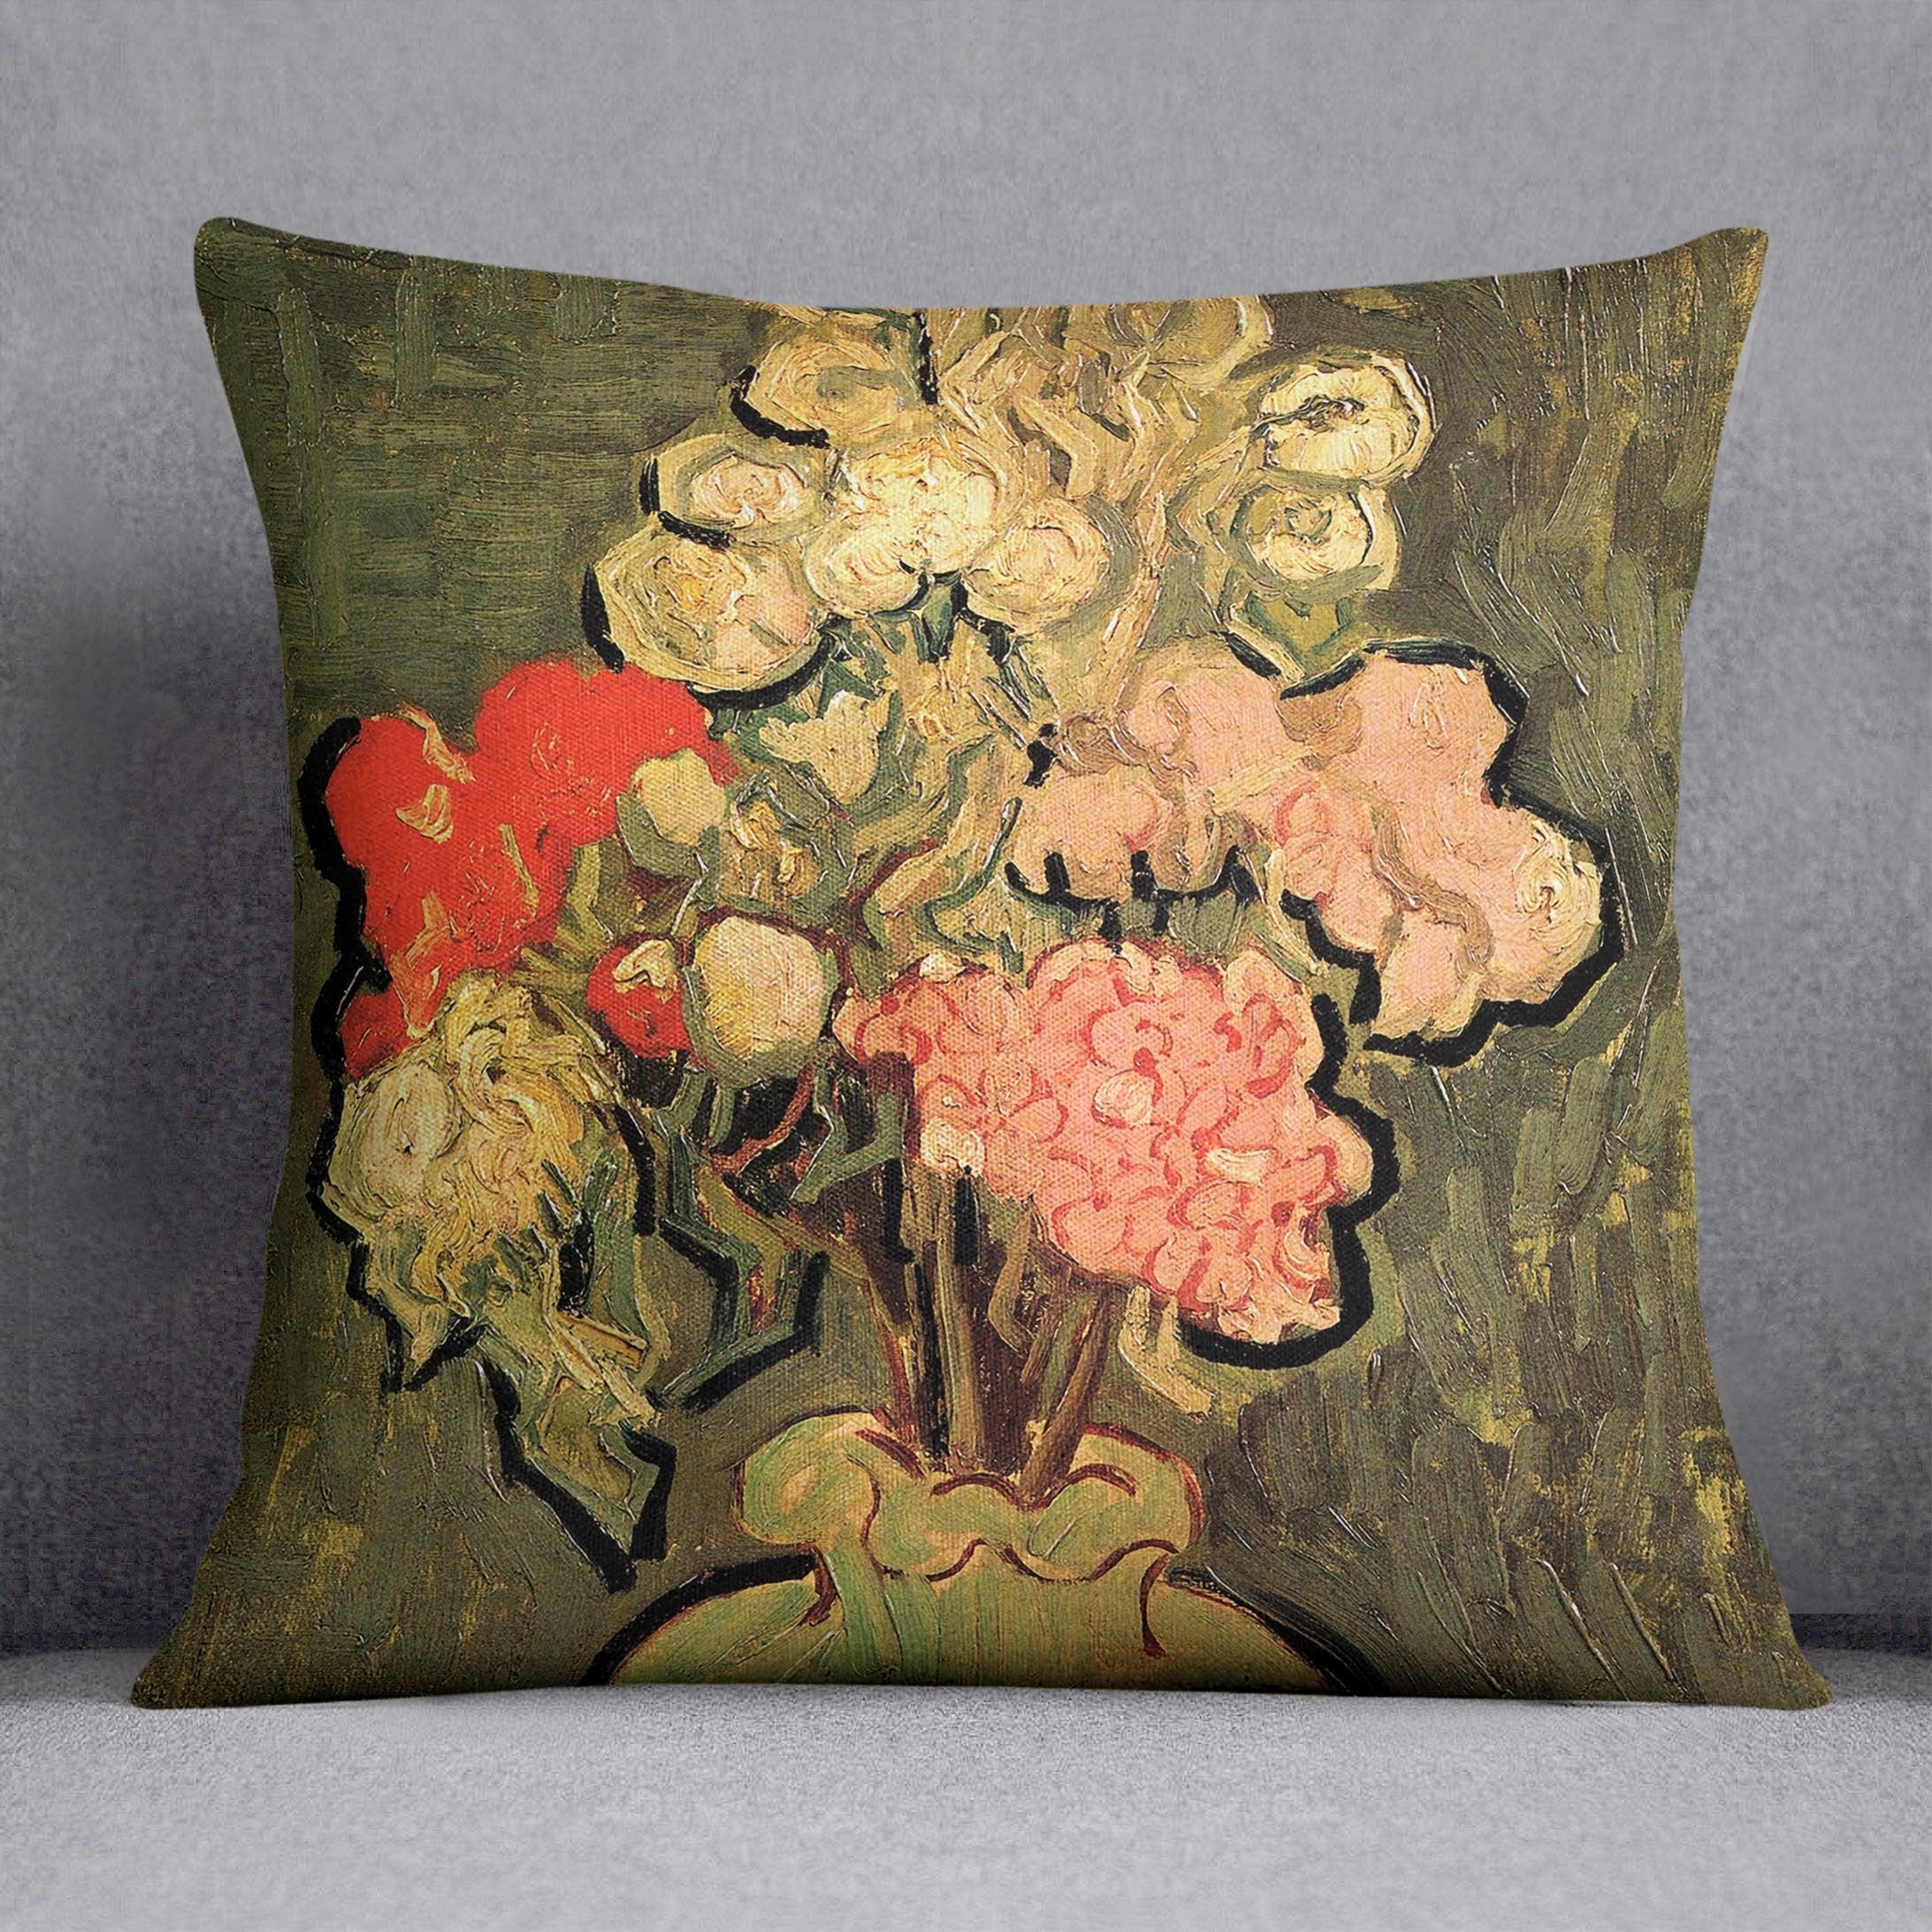 Still Life Vase with Rose-Mallows by Van Gogh Throw Pillow